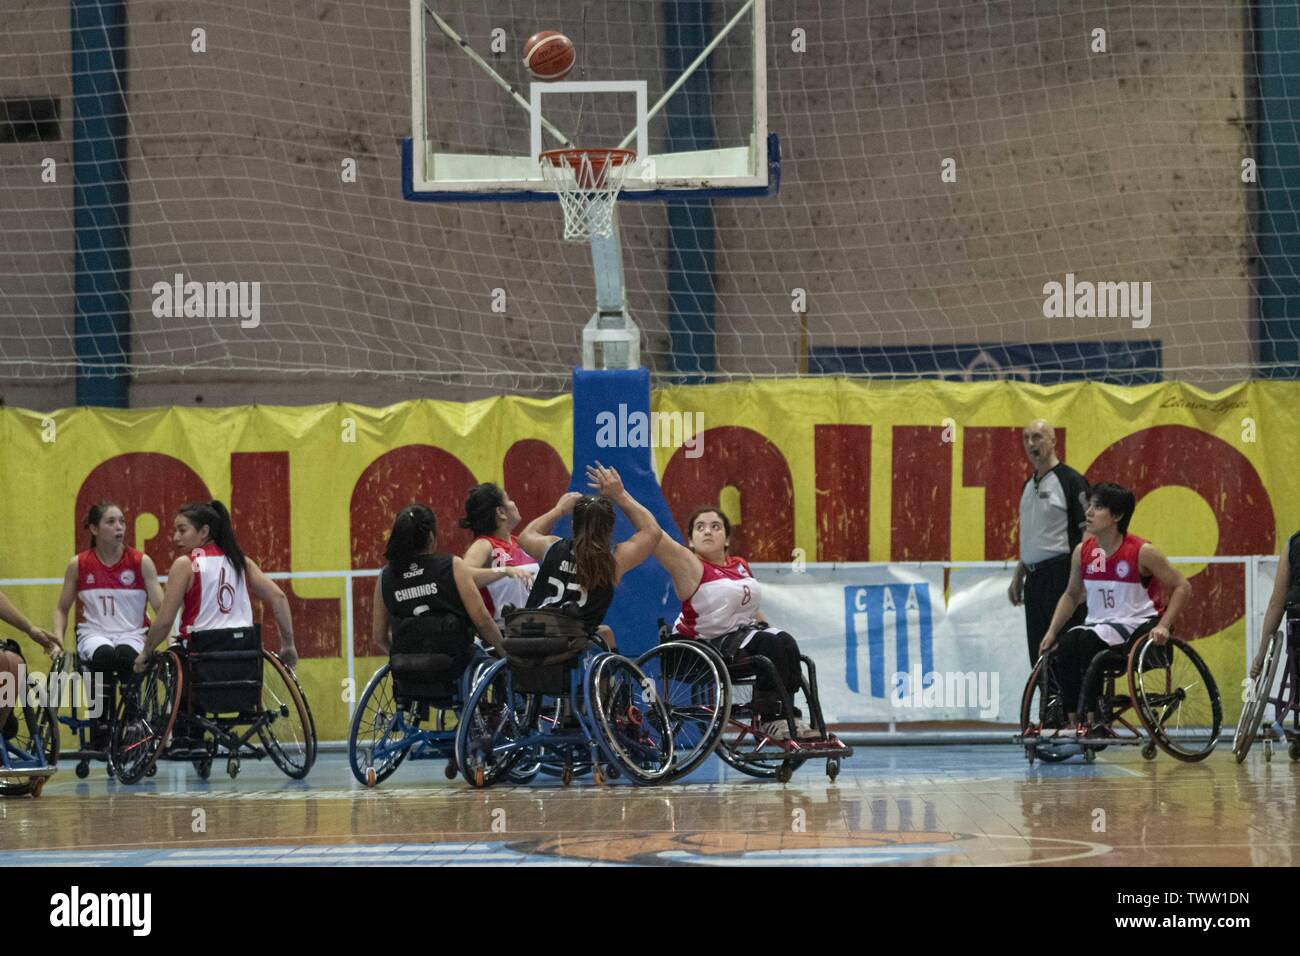 Firmat, Santa Fe, Argentina. 22nd June, 2019. The national female wheelchairb basketball teams of Argentina and Chile perform a friendly match ahead of Lima 2019 Parapan American Games. The match was a raisefunder event, since at present financial aid was cut off and the players have to assume the costs to participate in the tournament. Credit: Patricio Murphy/ZUMA Wire/Alamy Live News Stock Photo